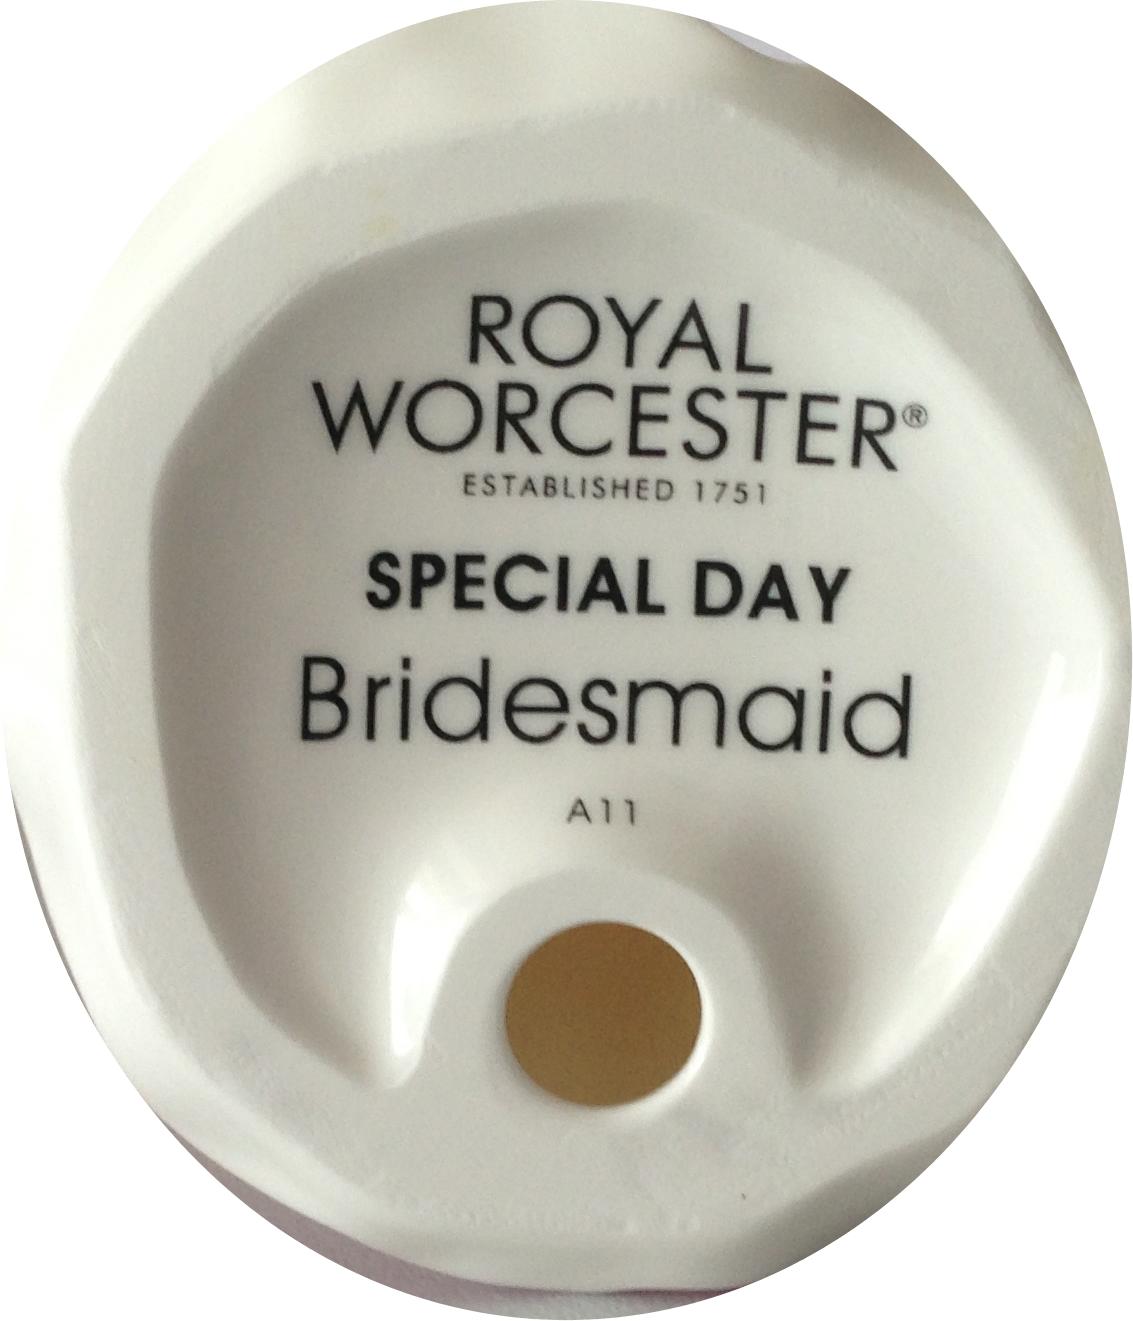 Royal Worcester Special Day Bridesmaid  bone china figurine 17cm tall